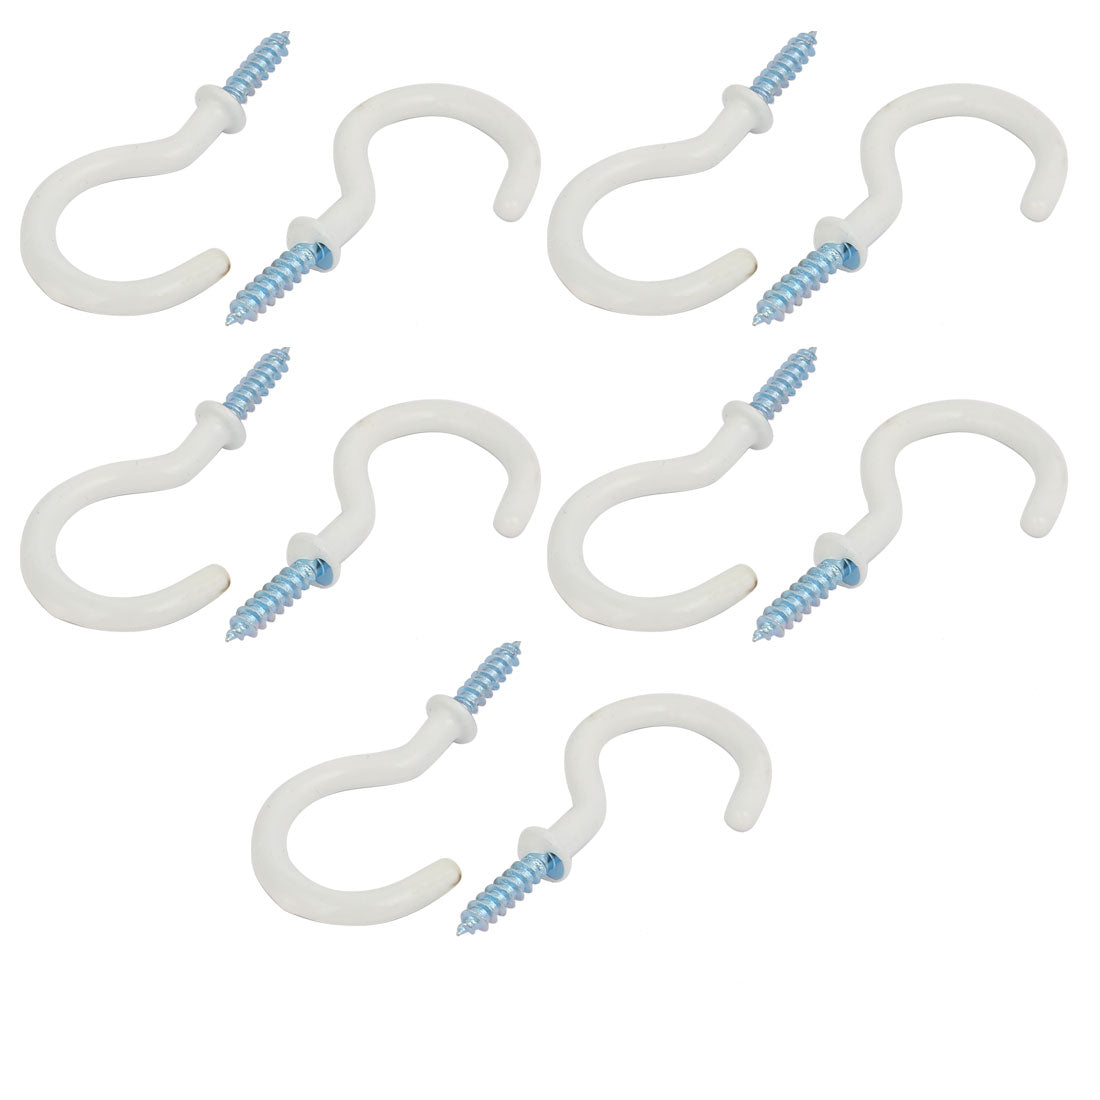 uxcell Uxcell 1-1/2 Inch Plastic Coated Screw-in Open Cup Ceiling Hooks Hangers White 10pcs